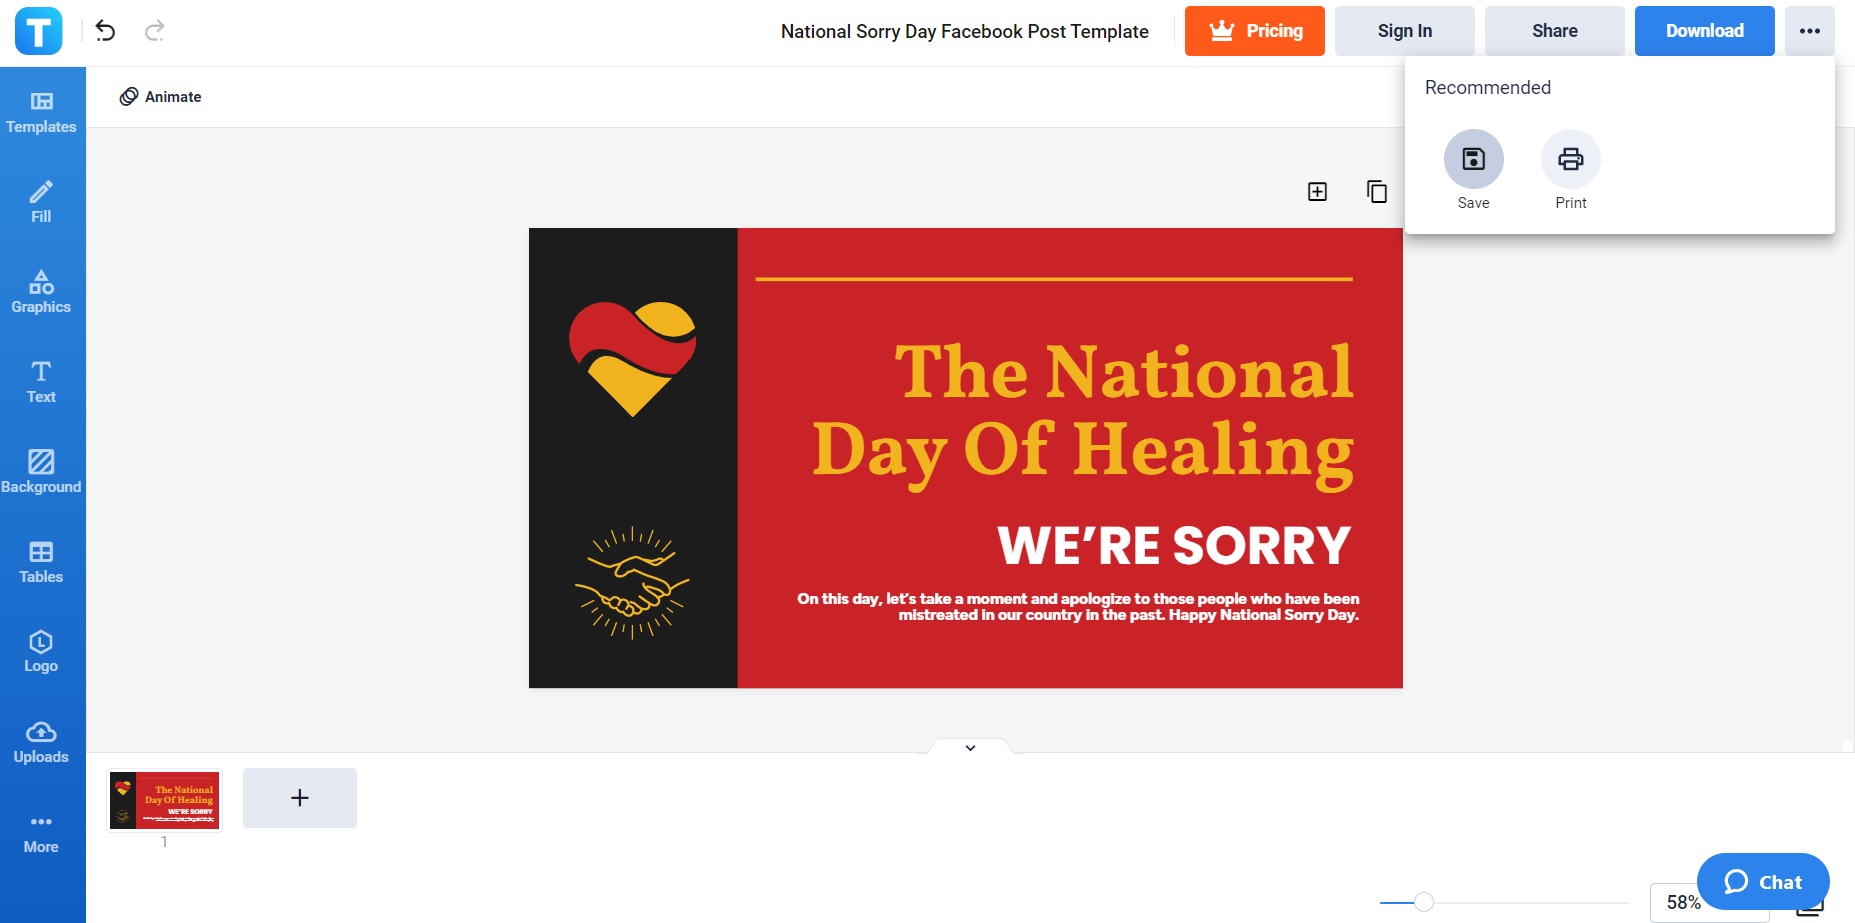 edit save and upload your national sorry day facebook post